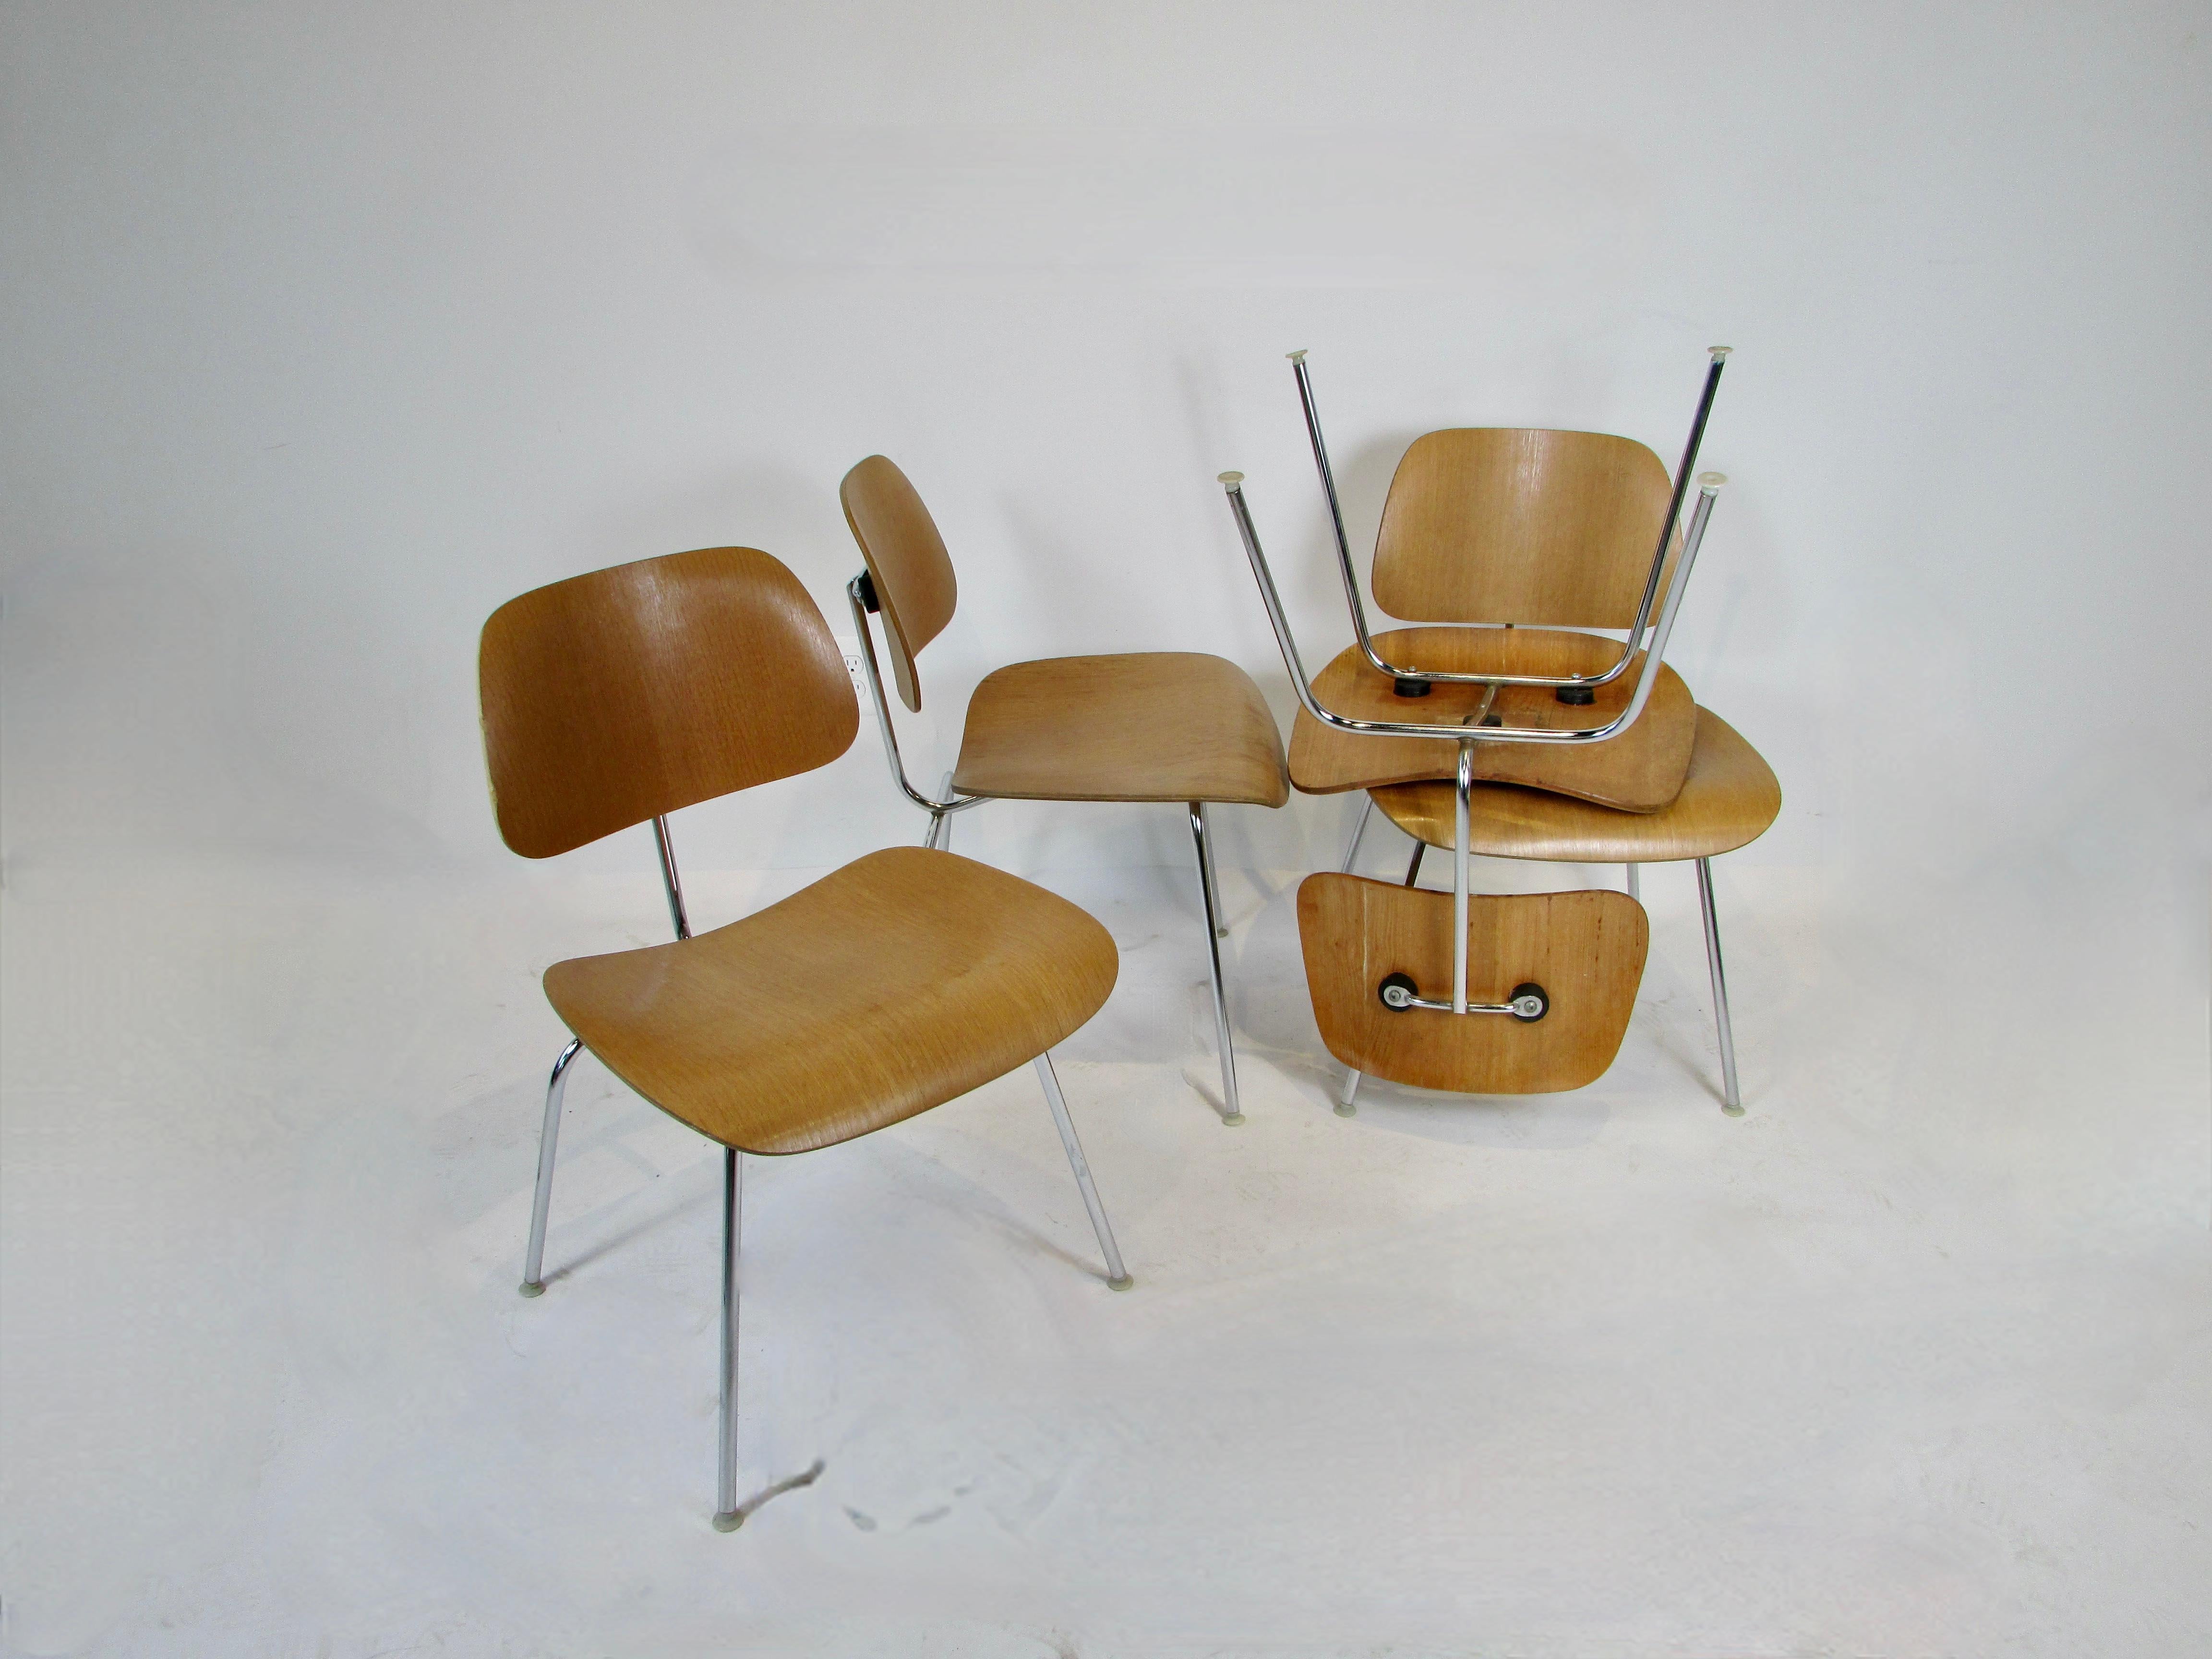 Set of four Eames for Herman Miller DCM chairs . Calico Ash grain laminate wood on chrome steel frames . Wood is in original finish which does show some wear , chrome frames are in fine condition . All glides are intact on the legs .  One chair